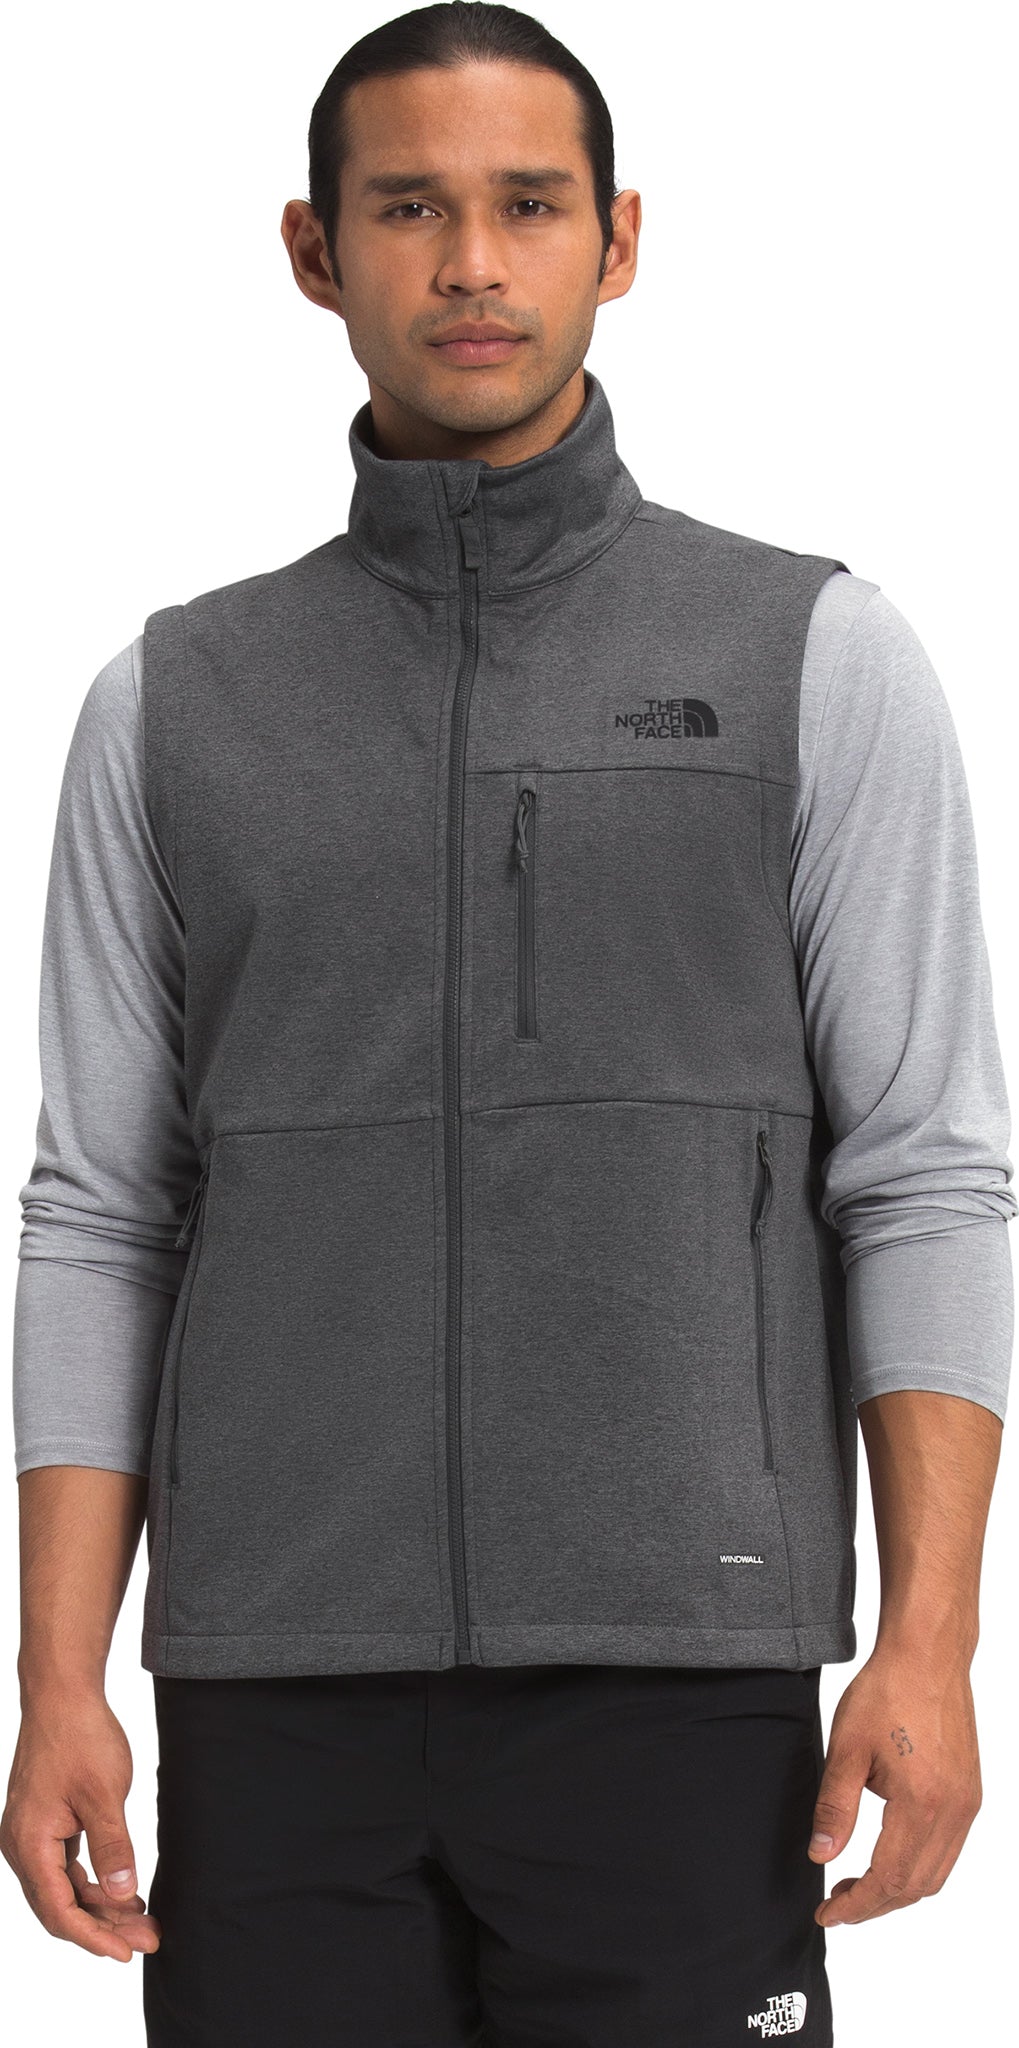 The North Face Apex Canyonwall Vest - Men’s